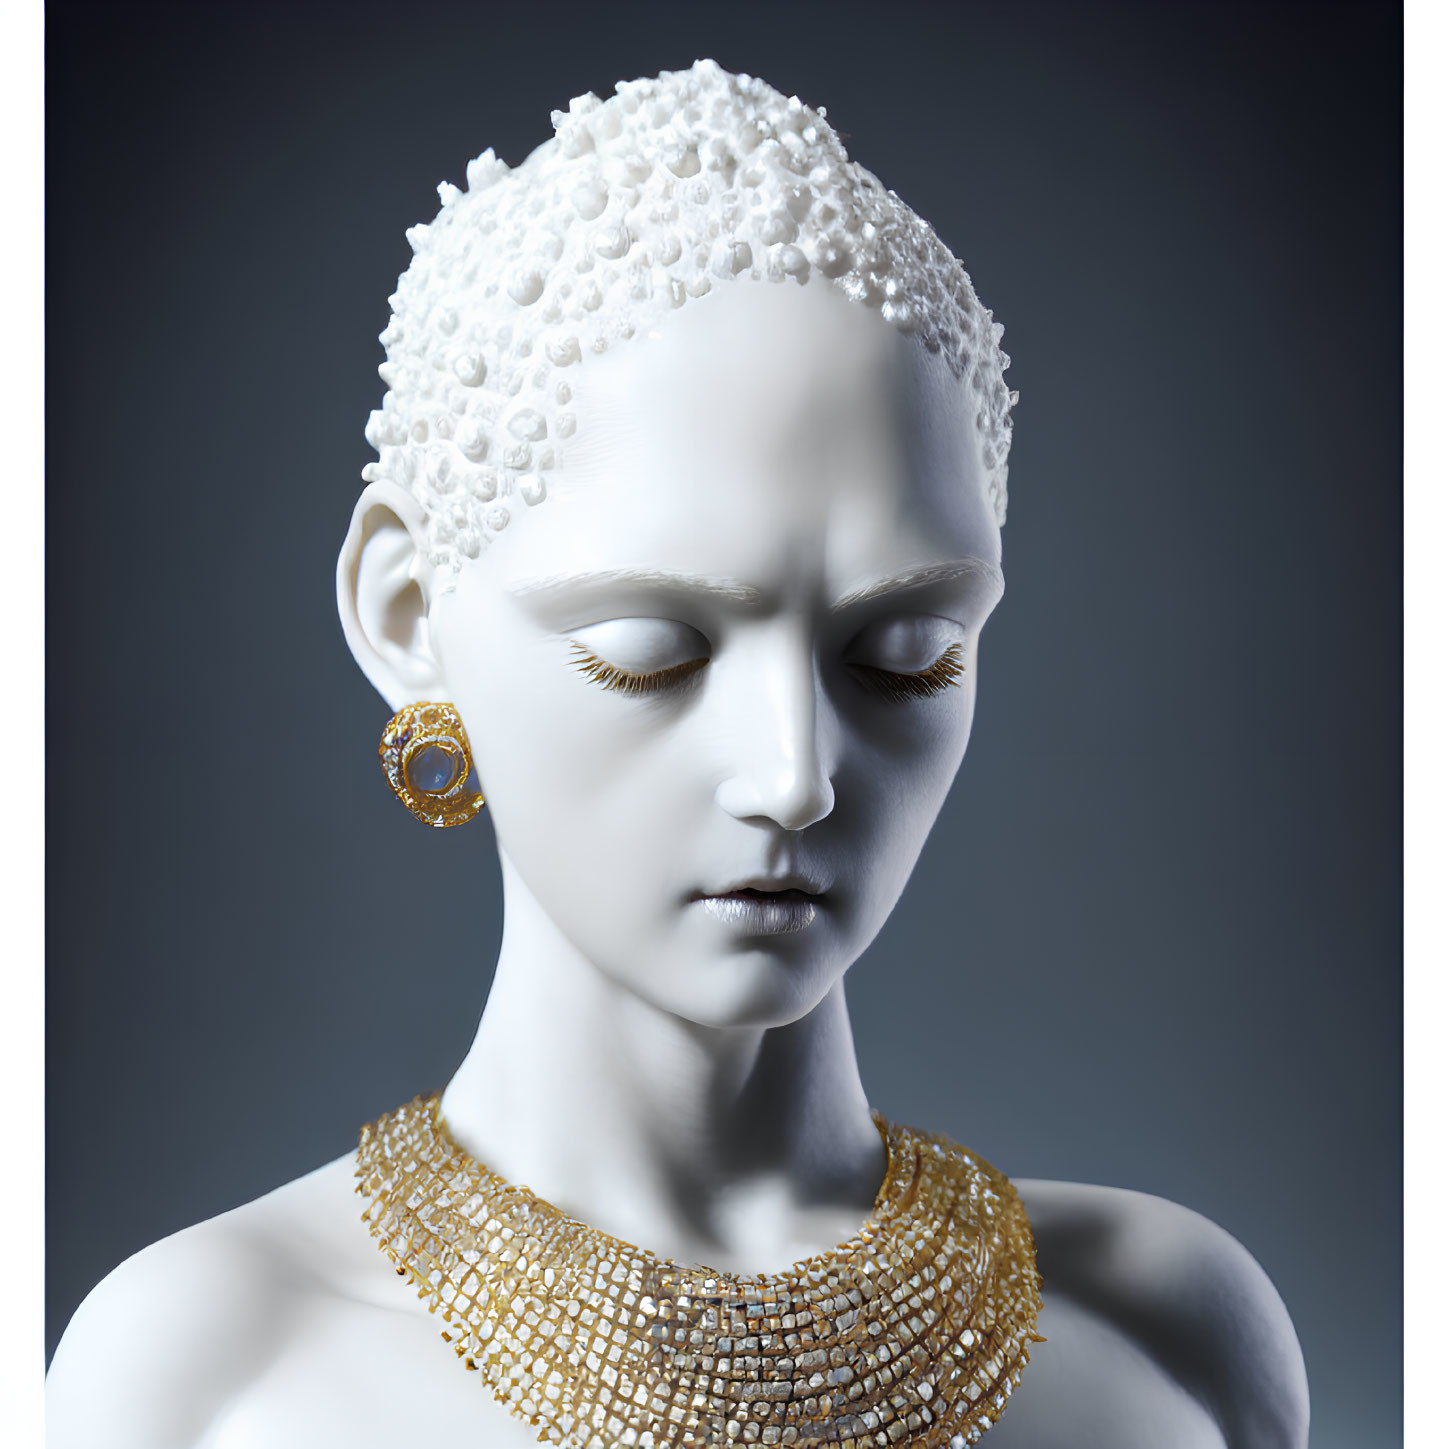 Stylized mannequin with intricate textures, golden earrings, eyelashes, and beaded necklace